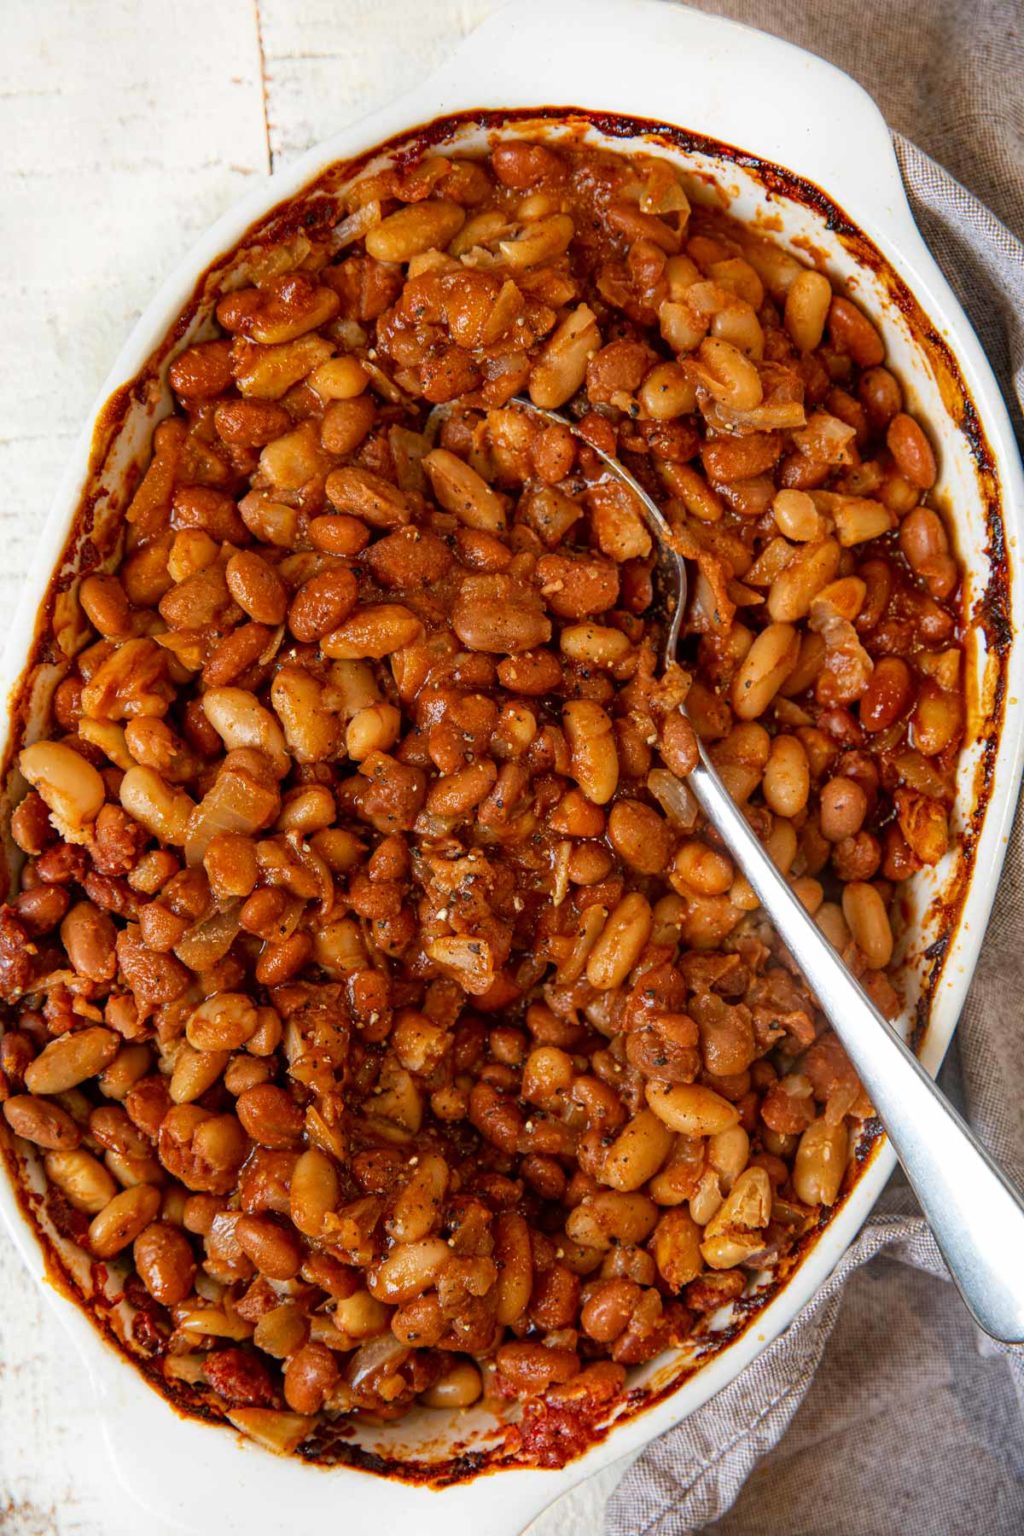 Healthy Baked Beans Recipe (No Ketchup!) - Cooking Made Healthy